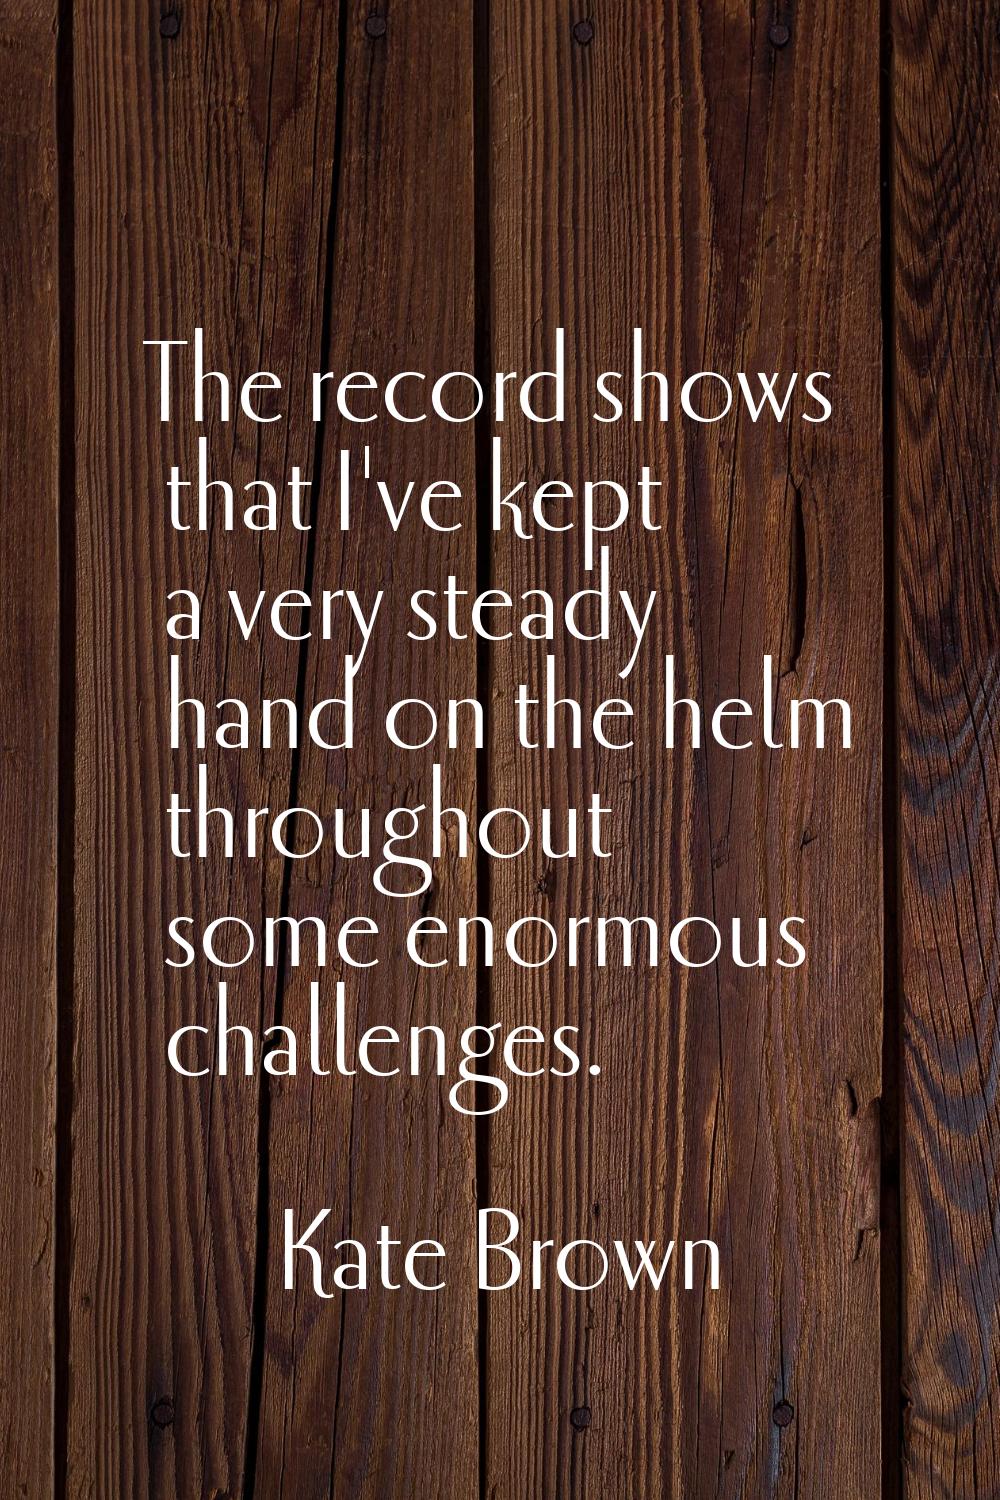 The record shows that I've kept a very steady hand on the helm throughout some enormous challenges.